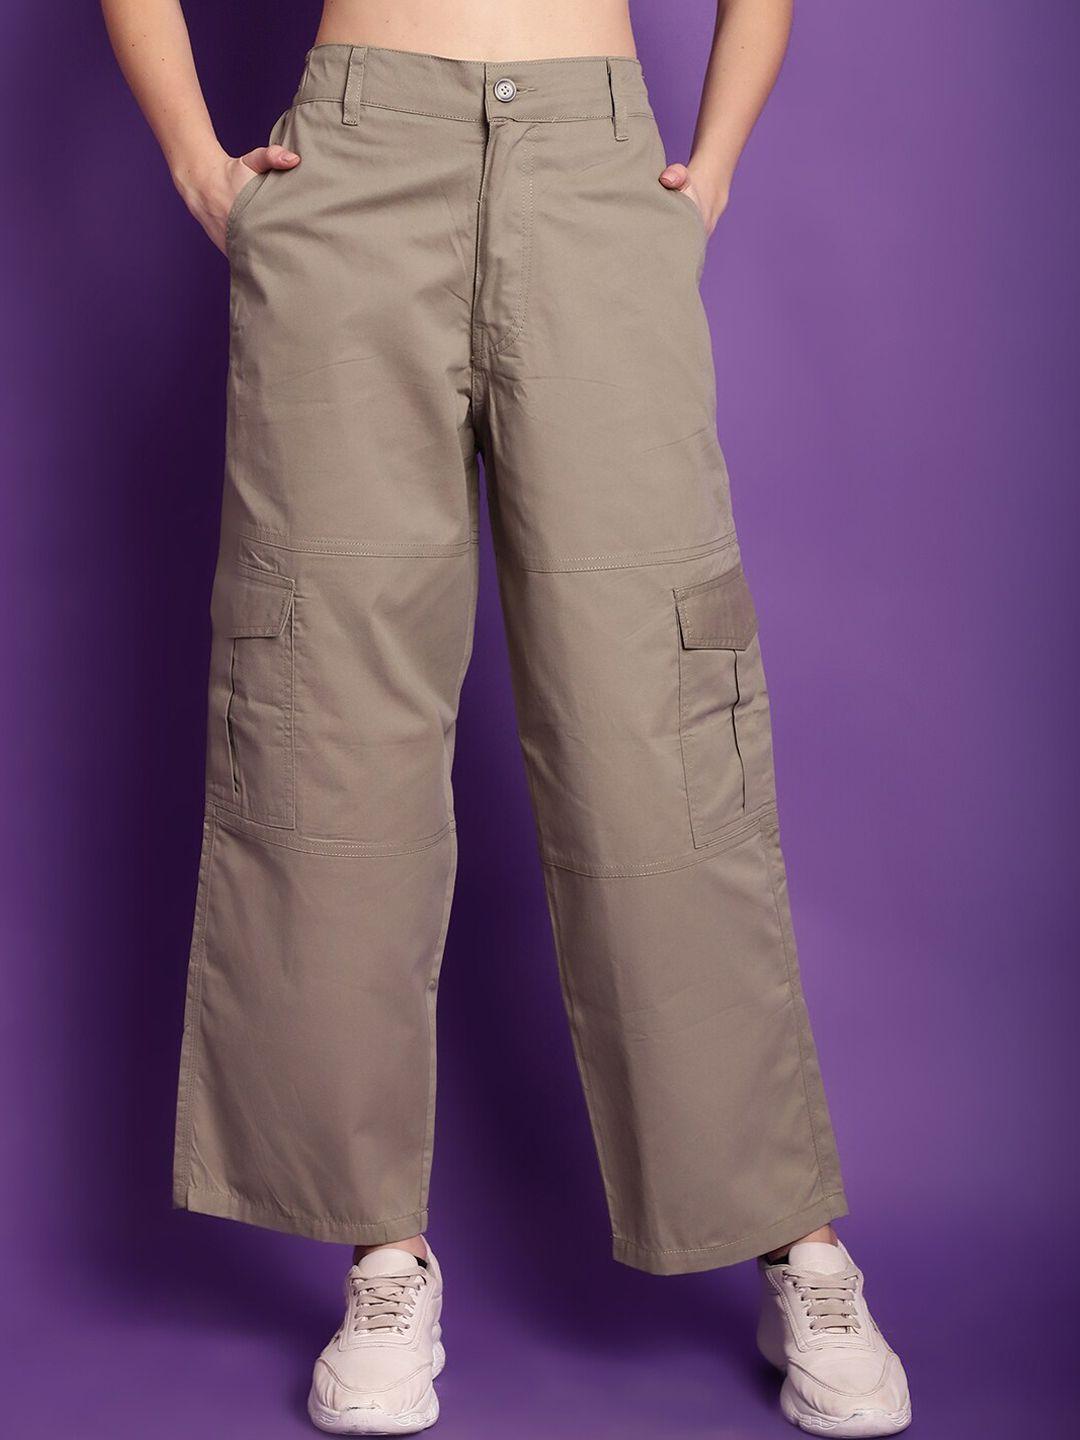 tag 7 women high rise relaxed straight leg straight fit cotton cargos trousers